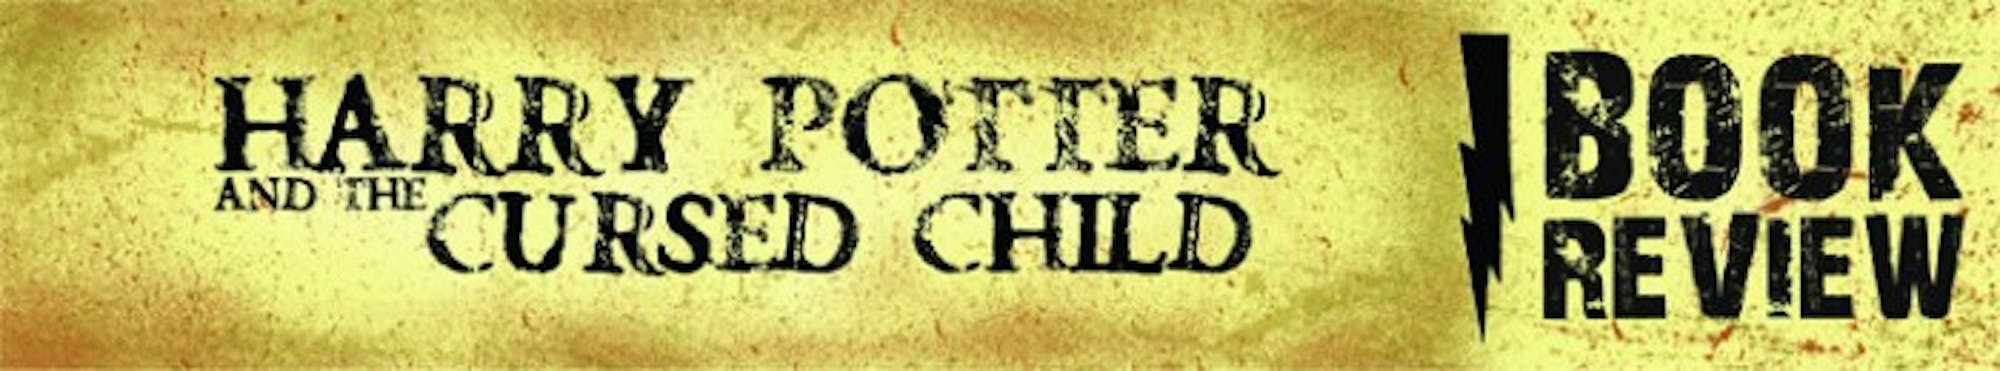 harry potter book eview banner web